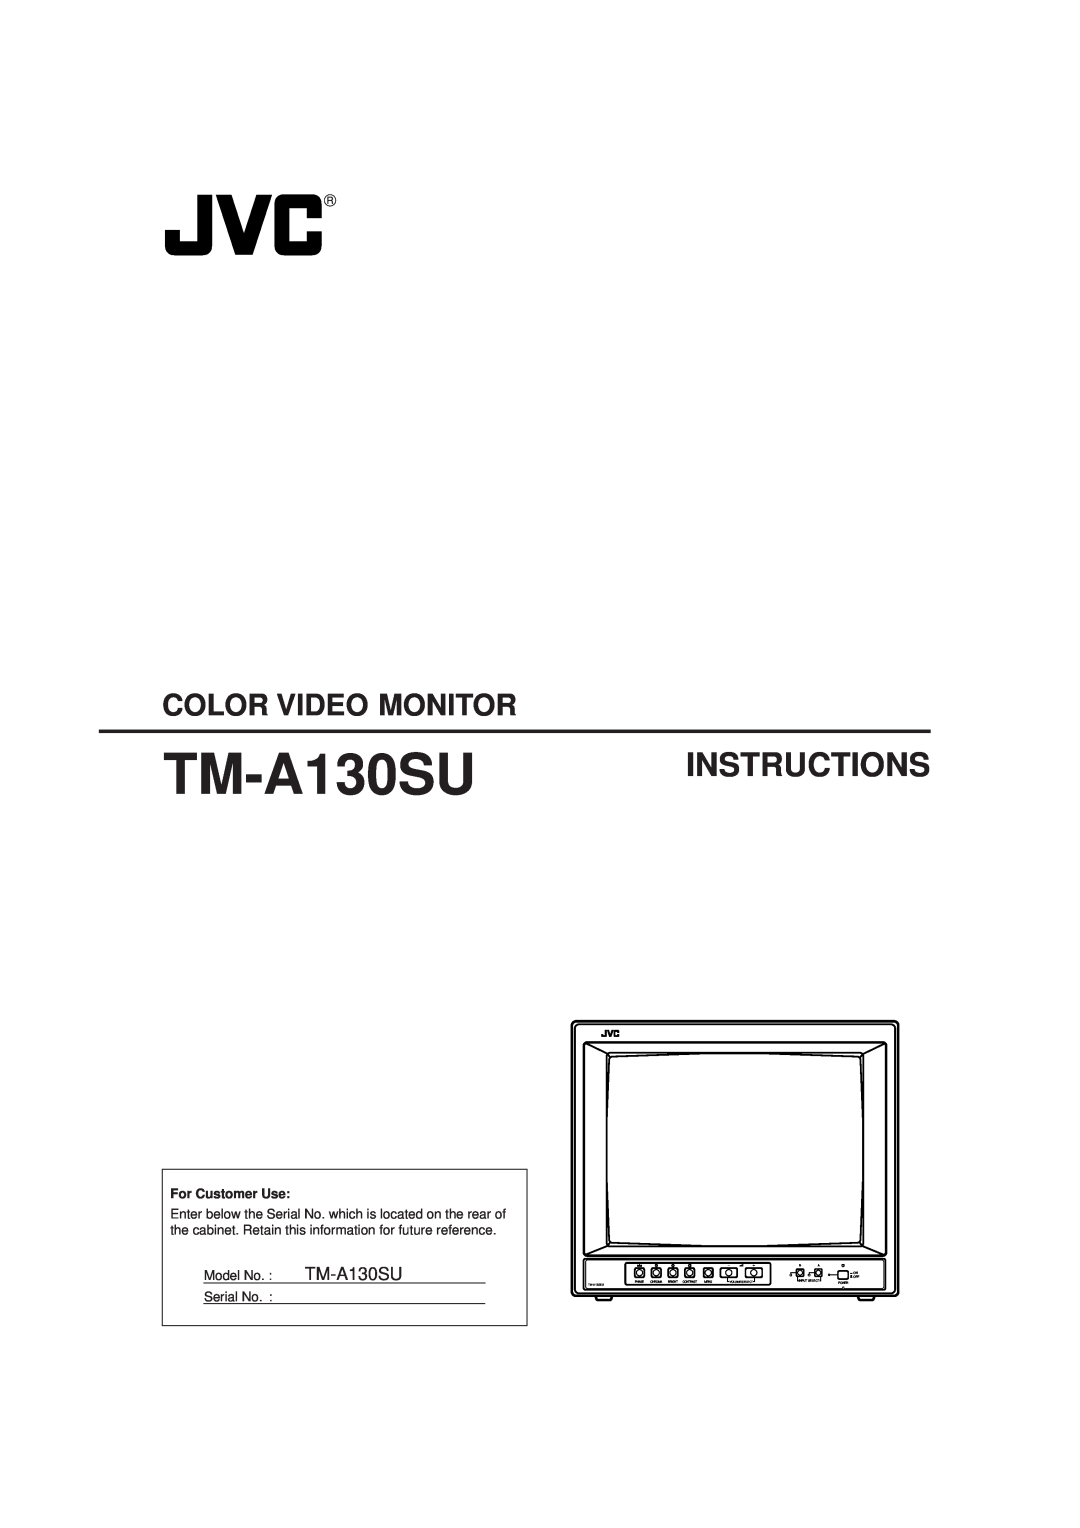 JVC TM-A130SU manual Color Video Monitor, Instructions, Phase, Chroma Bright Contrast, Menu, Power, Volume/Select 